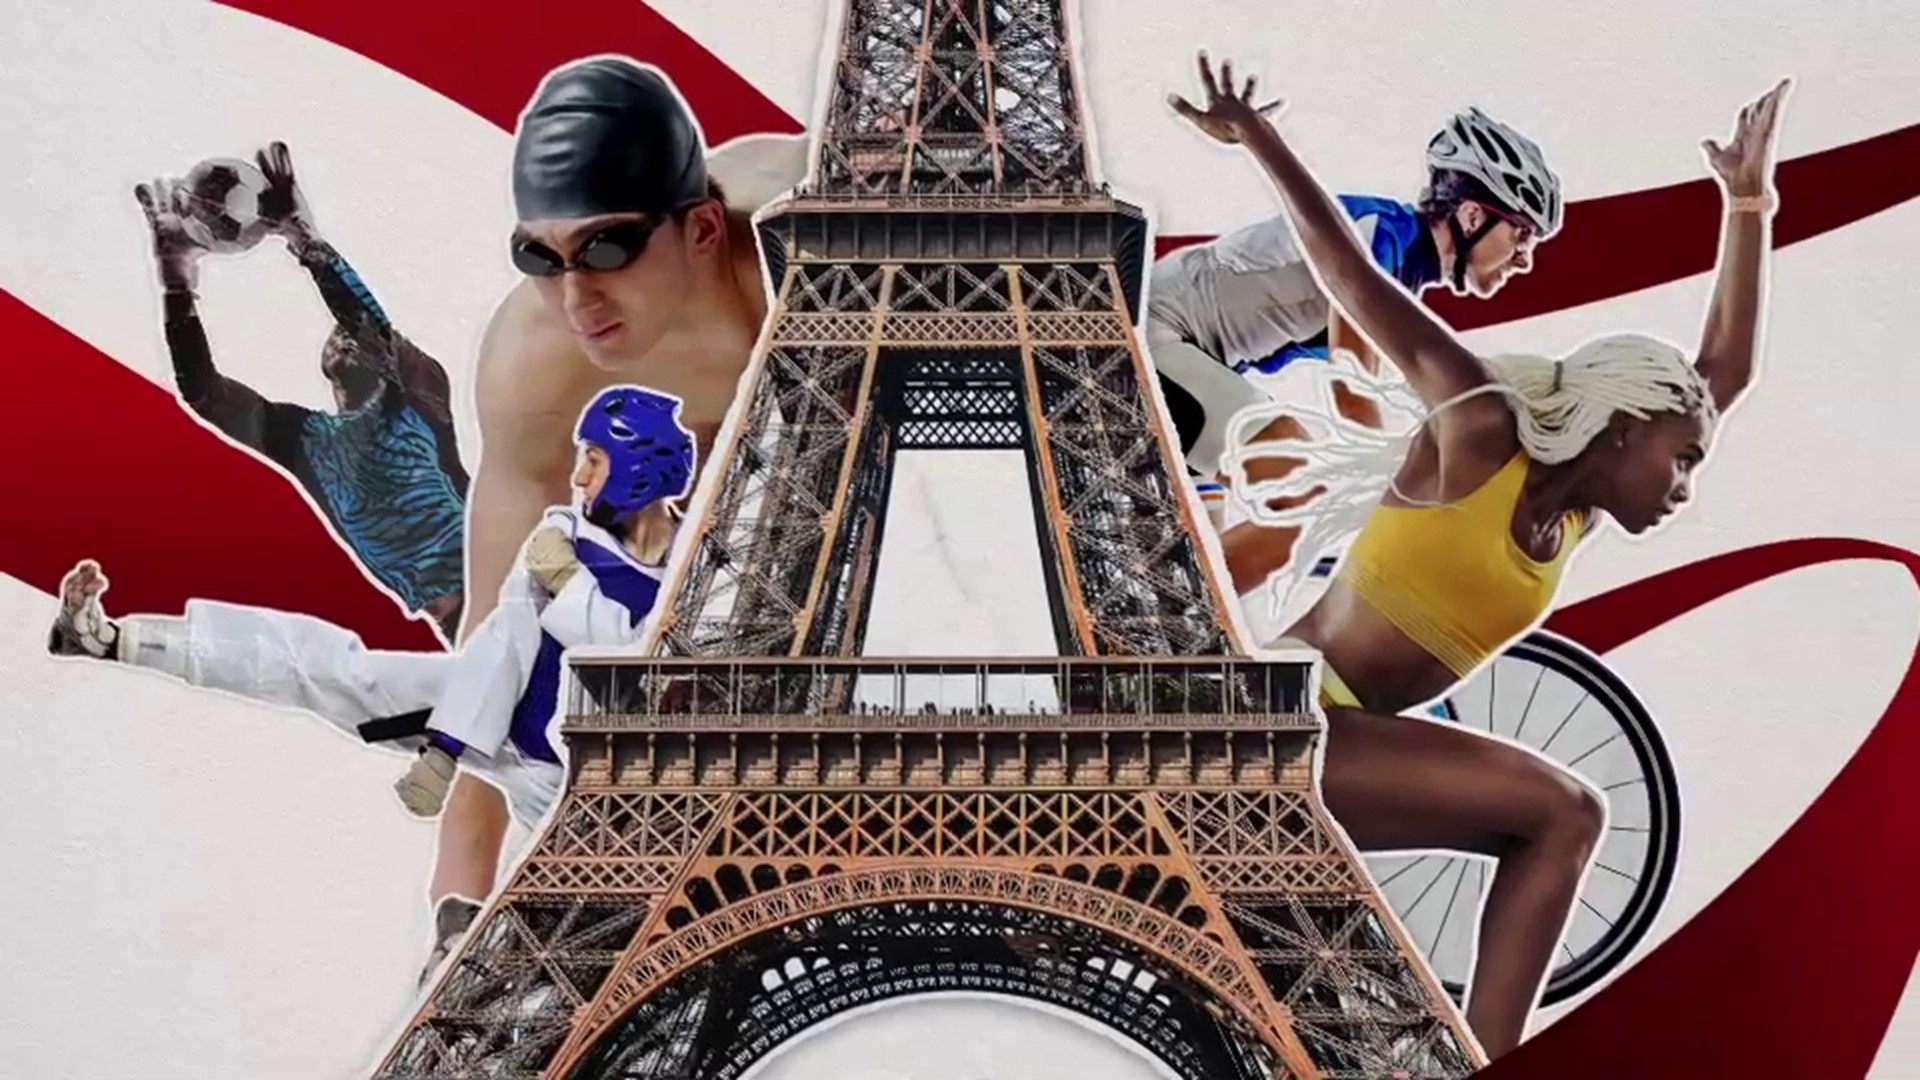 We're 100 days away from the Paris Summer Olympic Games.